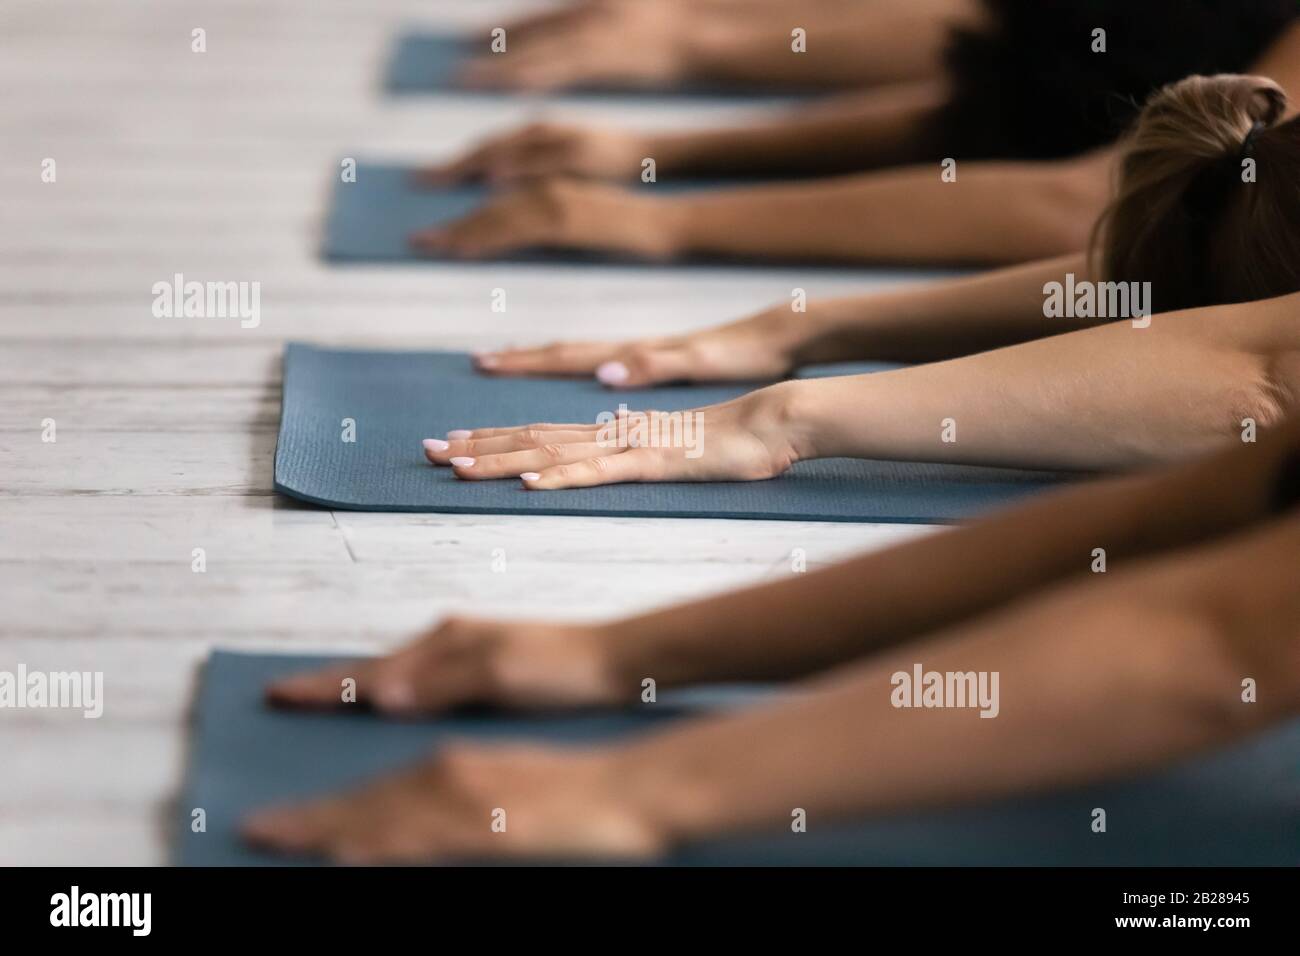 During yoga session people lying on mats performing Child Asana Stock Photo